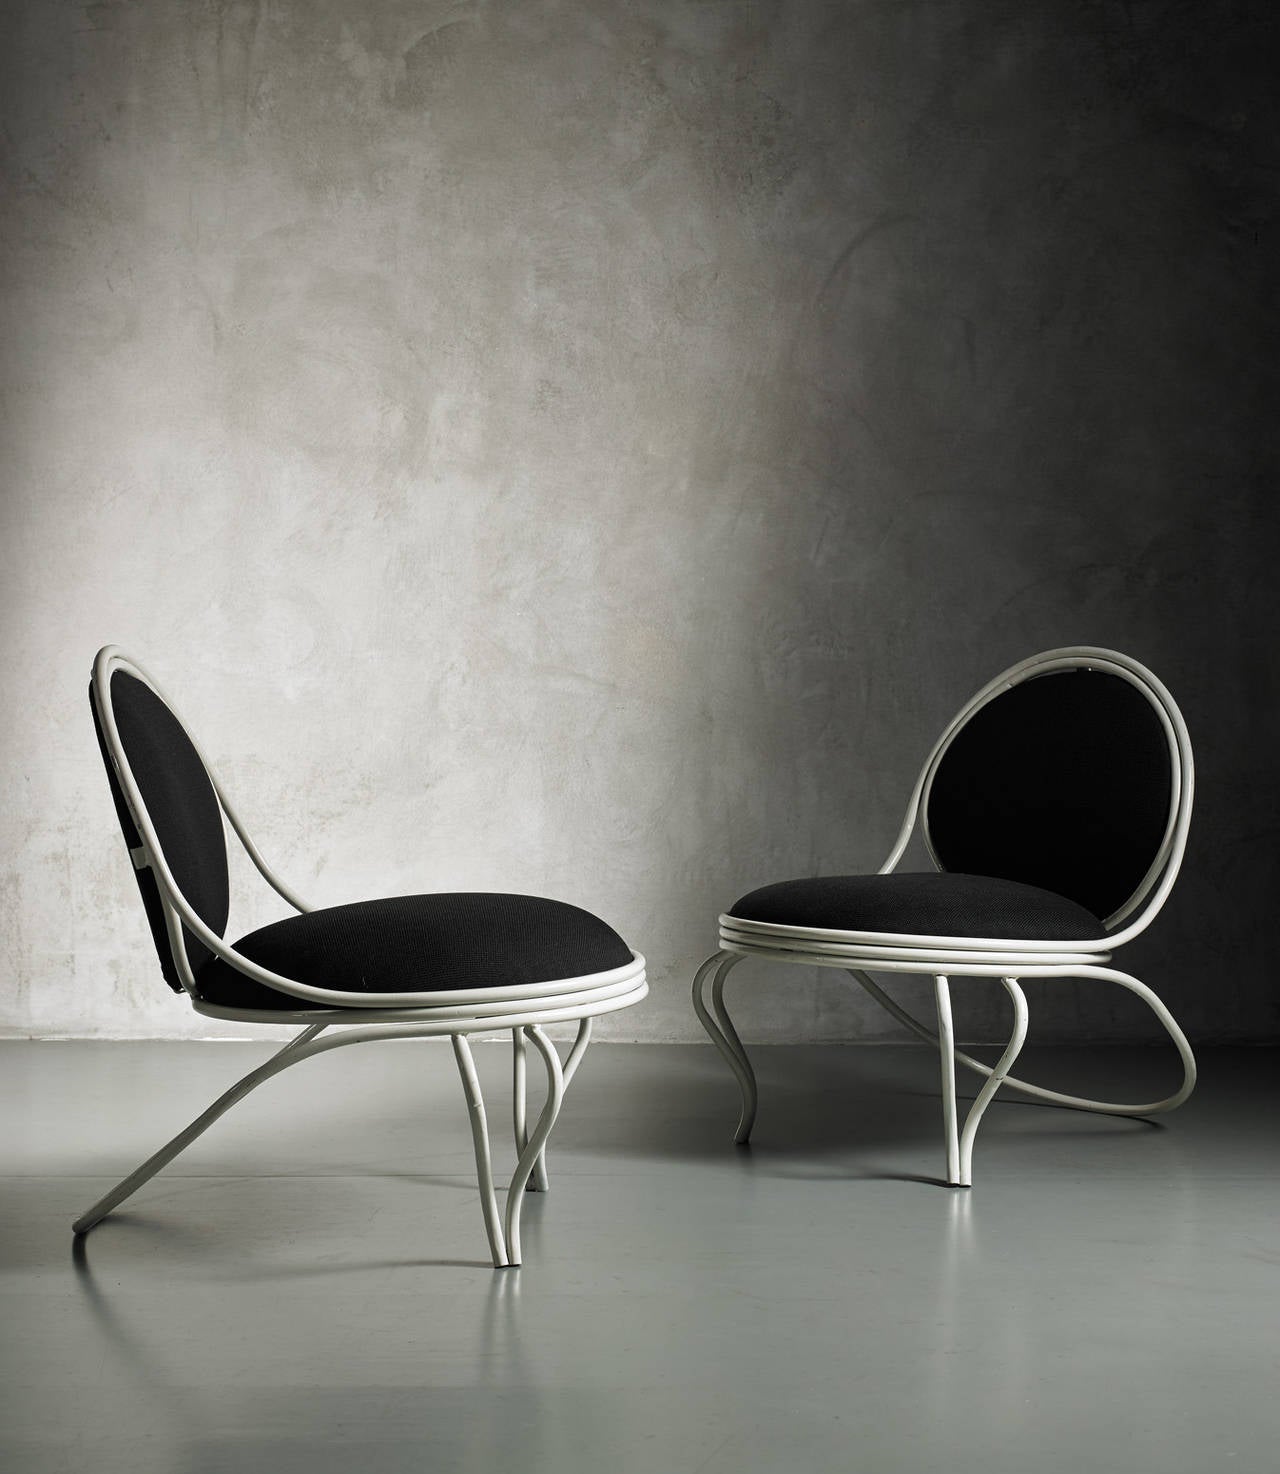 Pair of low armchairs by Mathieu Mategot
France, 1971
Laquered white metal, black cotton